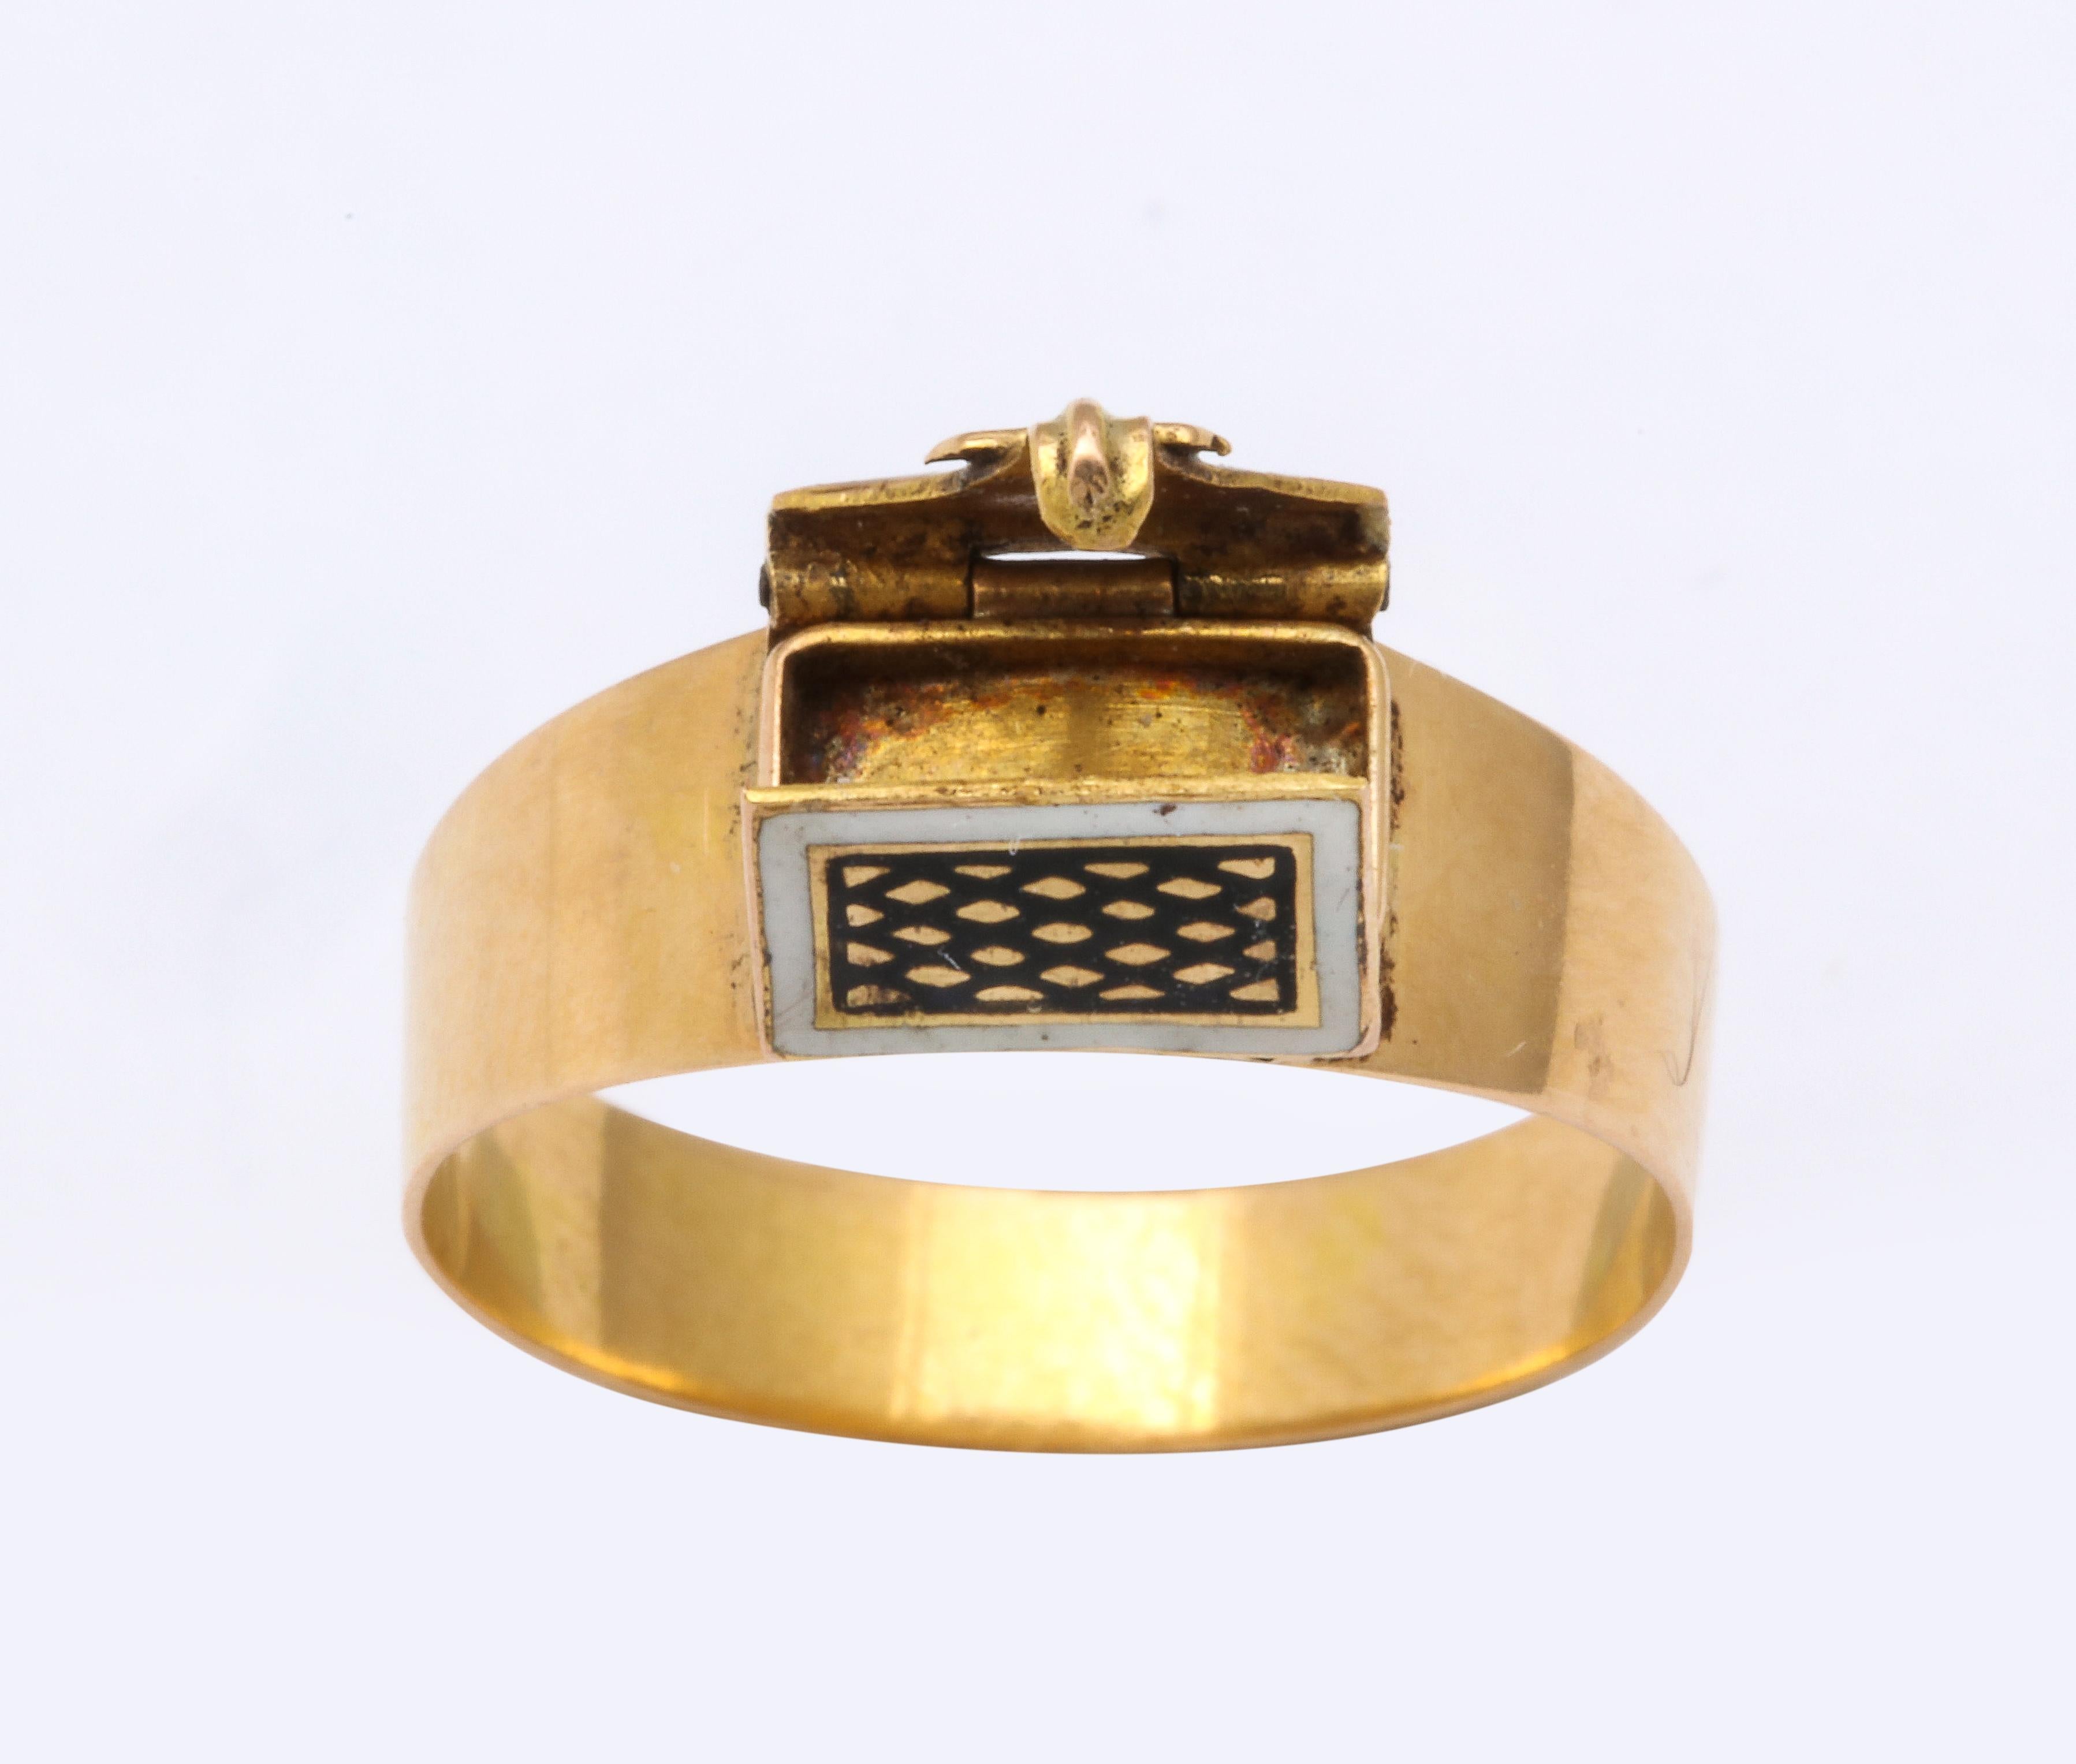 A rare ring indeed with an enamel and gold little unlocking envelope on the face of a 15Kt gold shank. Flip open the envelope and there is an empty small box. The ring is Georgian made between c.1811 and 1820, quite early. The envelope is framed in